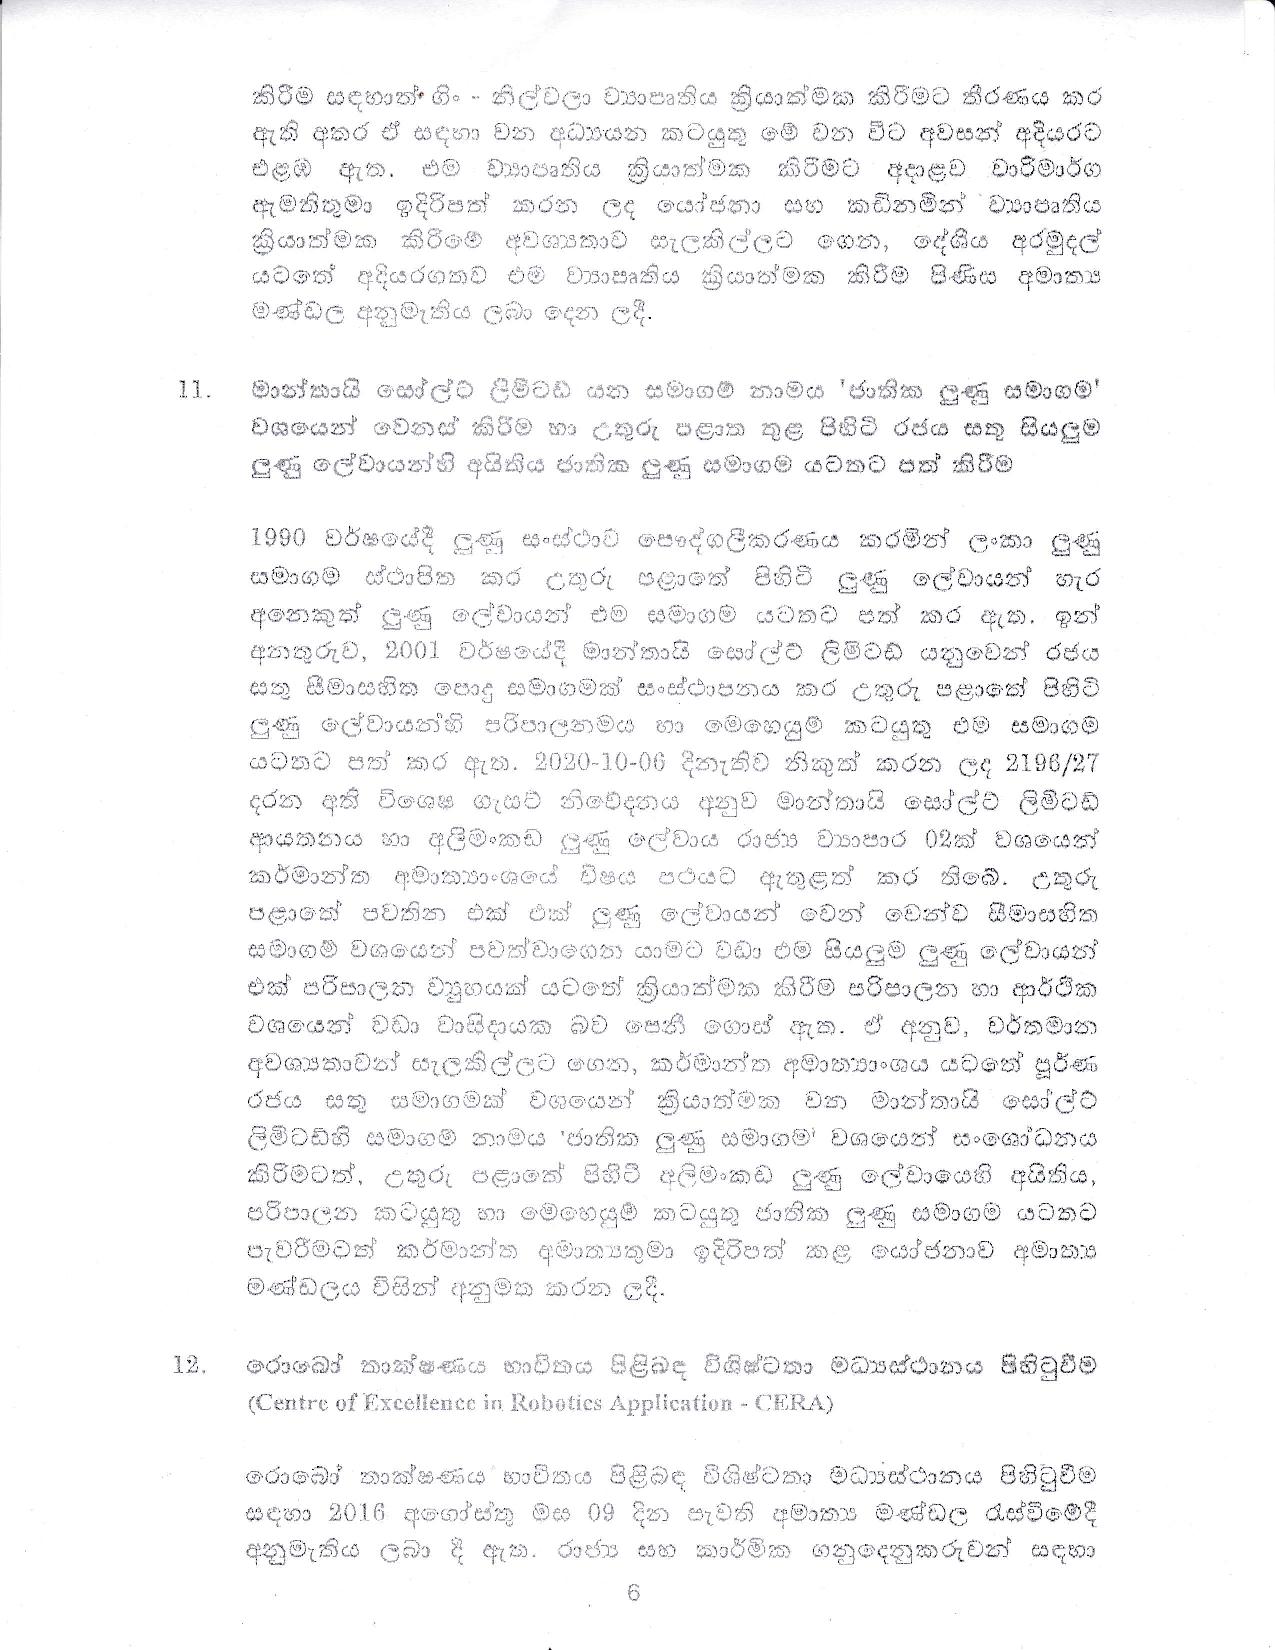 Cabinet Decision on 16.11.2020 page 006